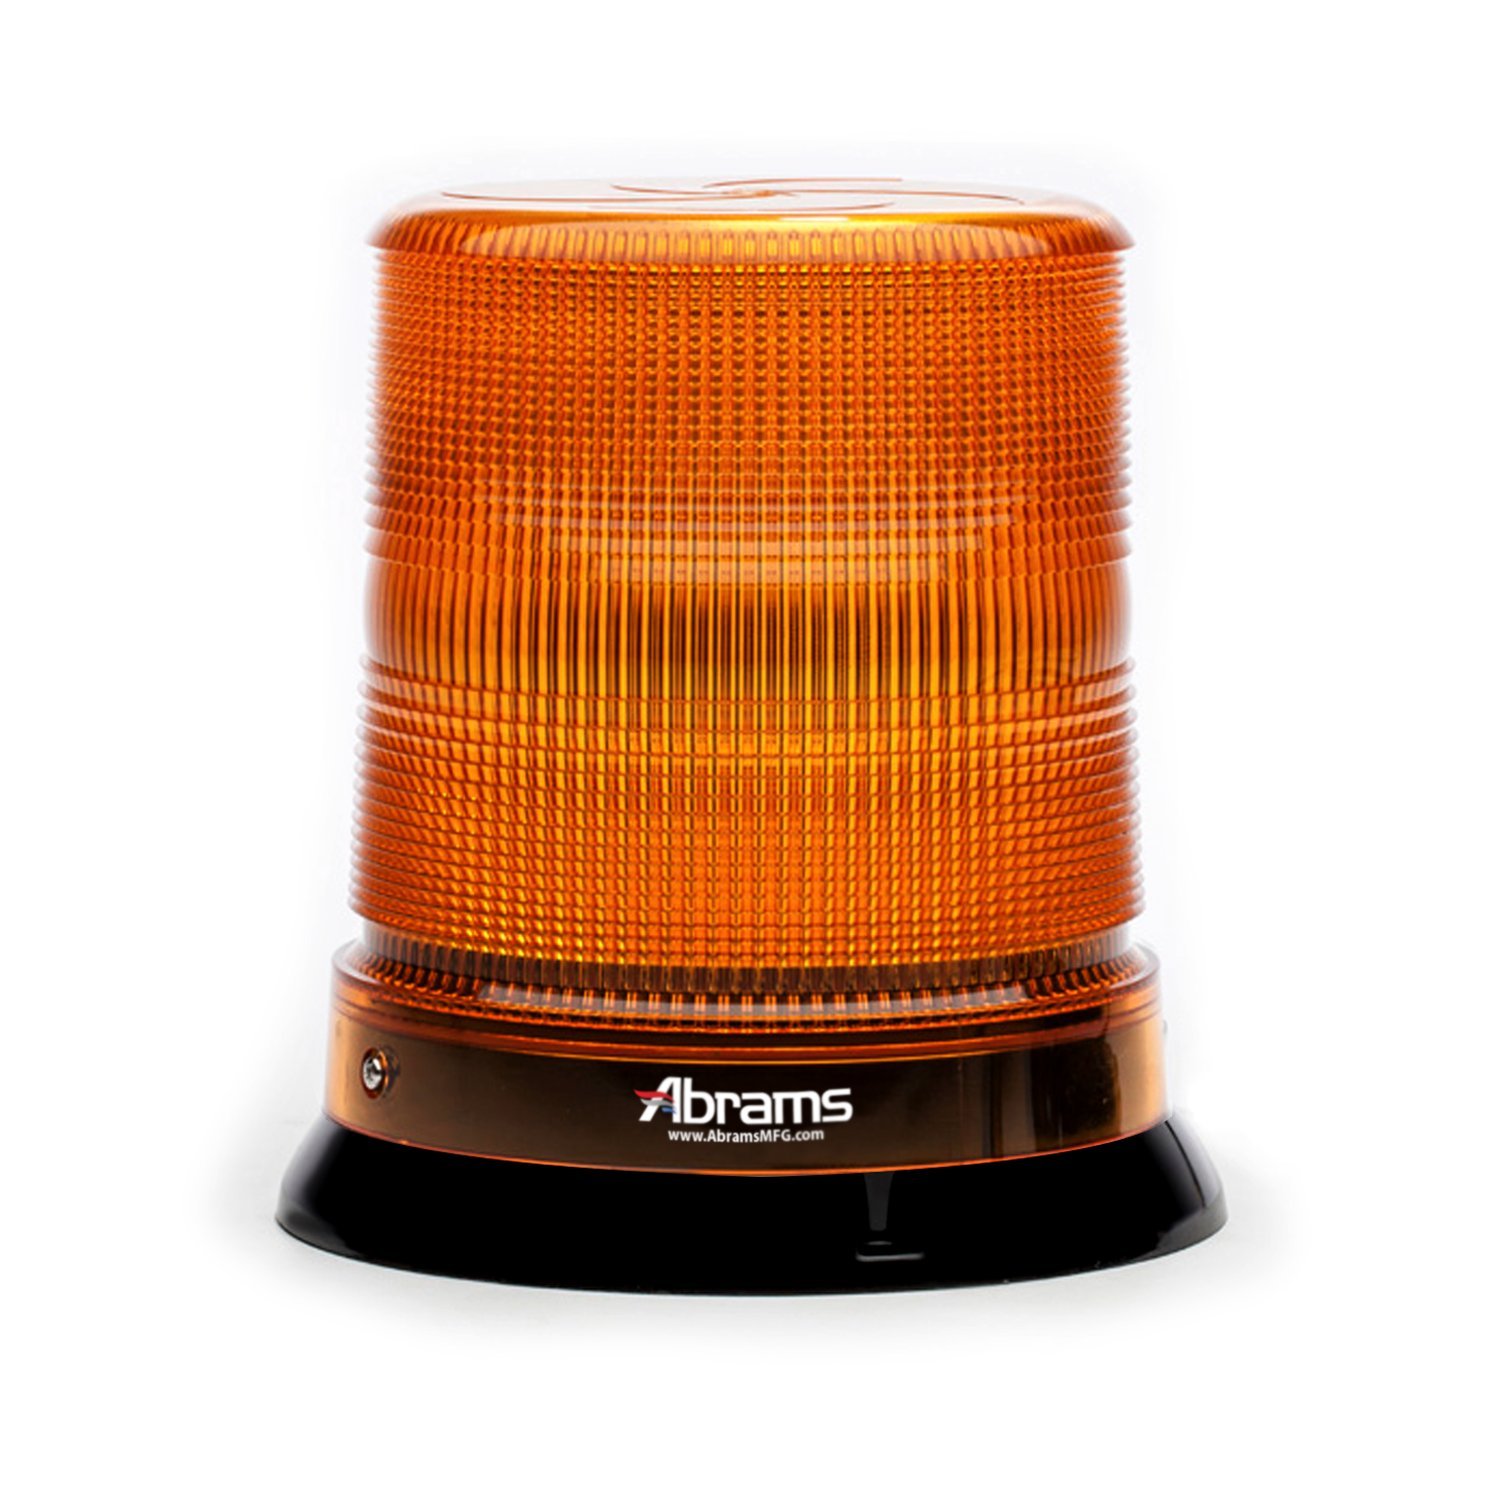 Abrams SAE Class-1 StarEye 7" Inch Dome 12 LED Magnet/Permanent Mount Construction Vehicle Warning Strobe Beacon Light - Amber